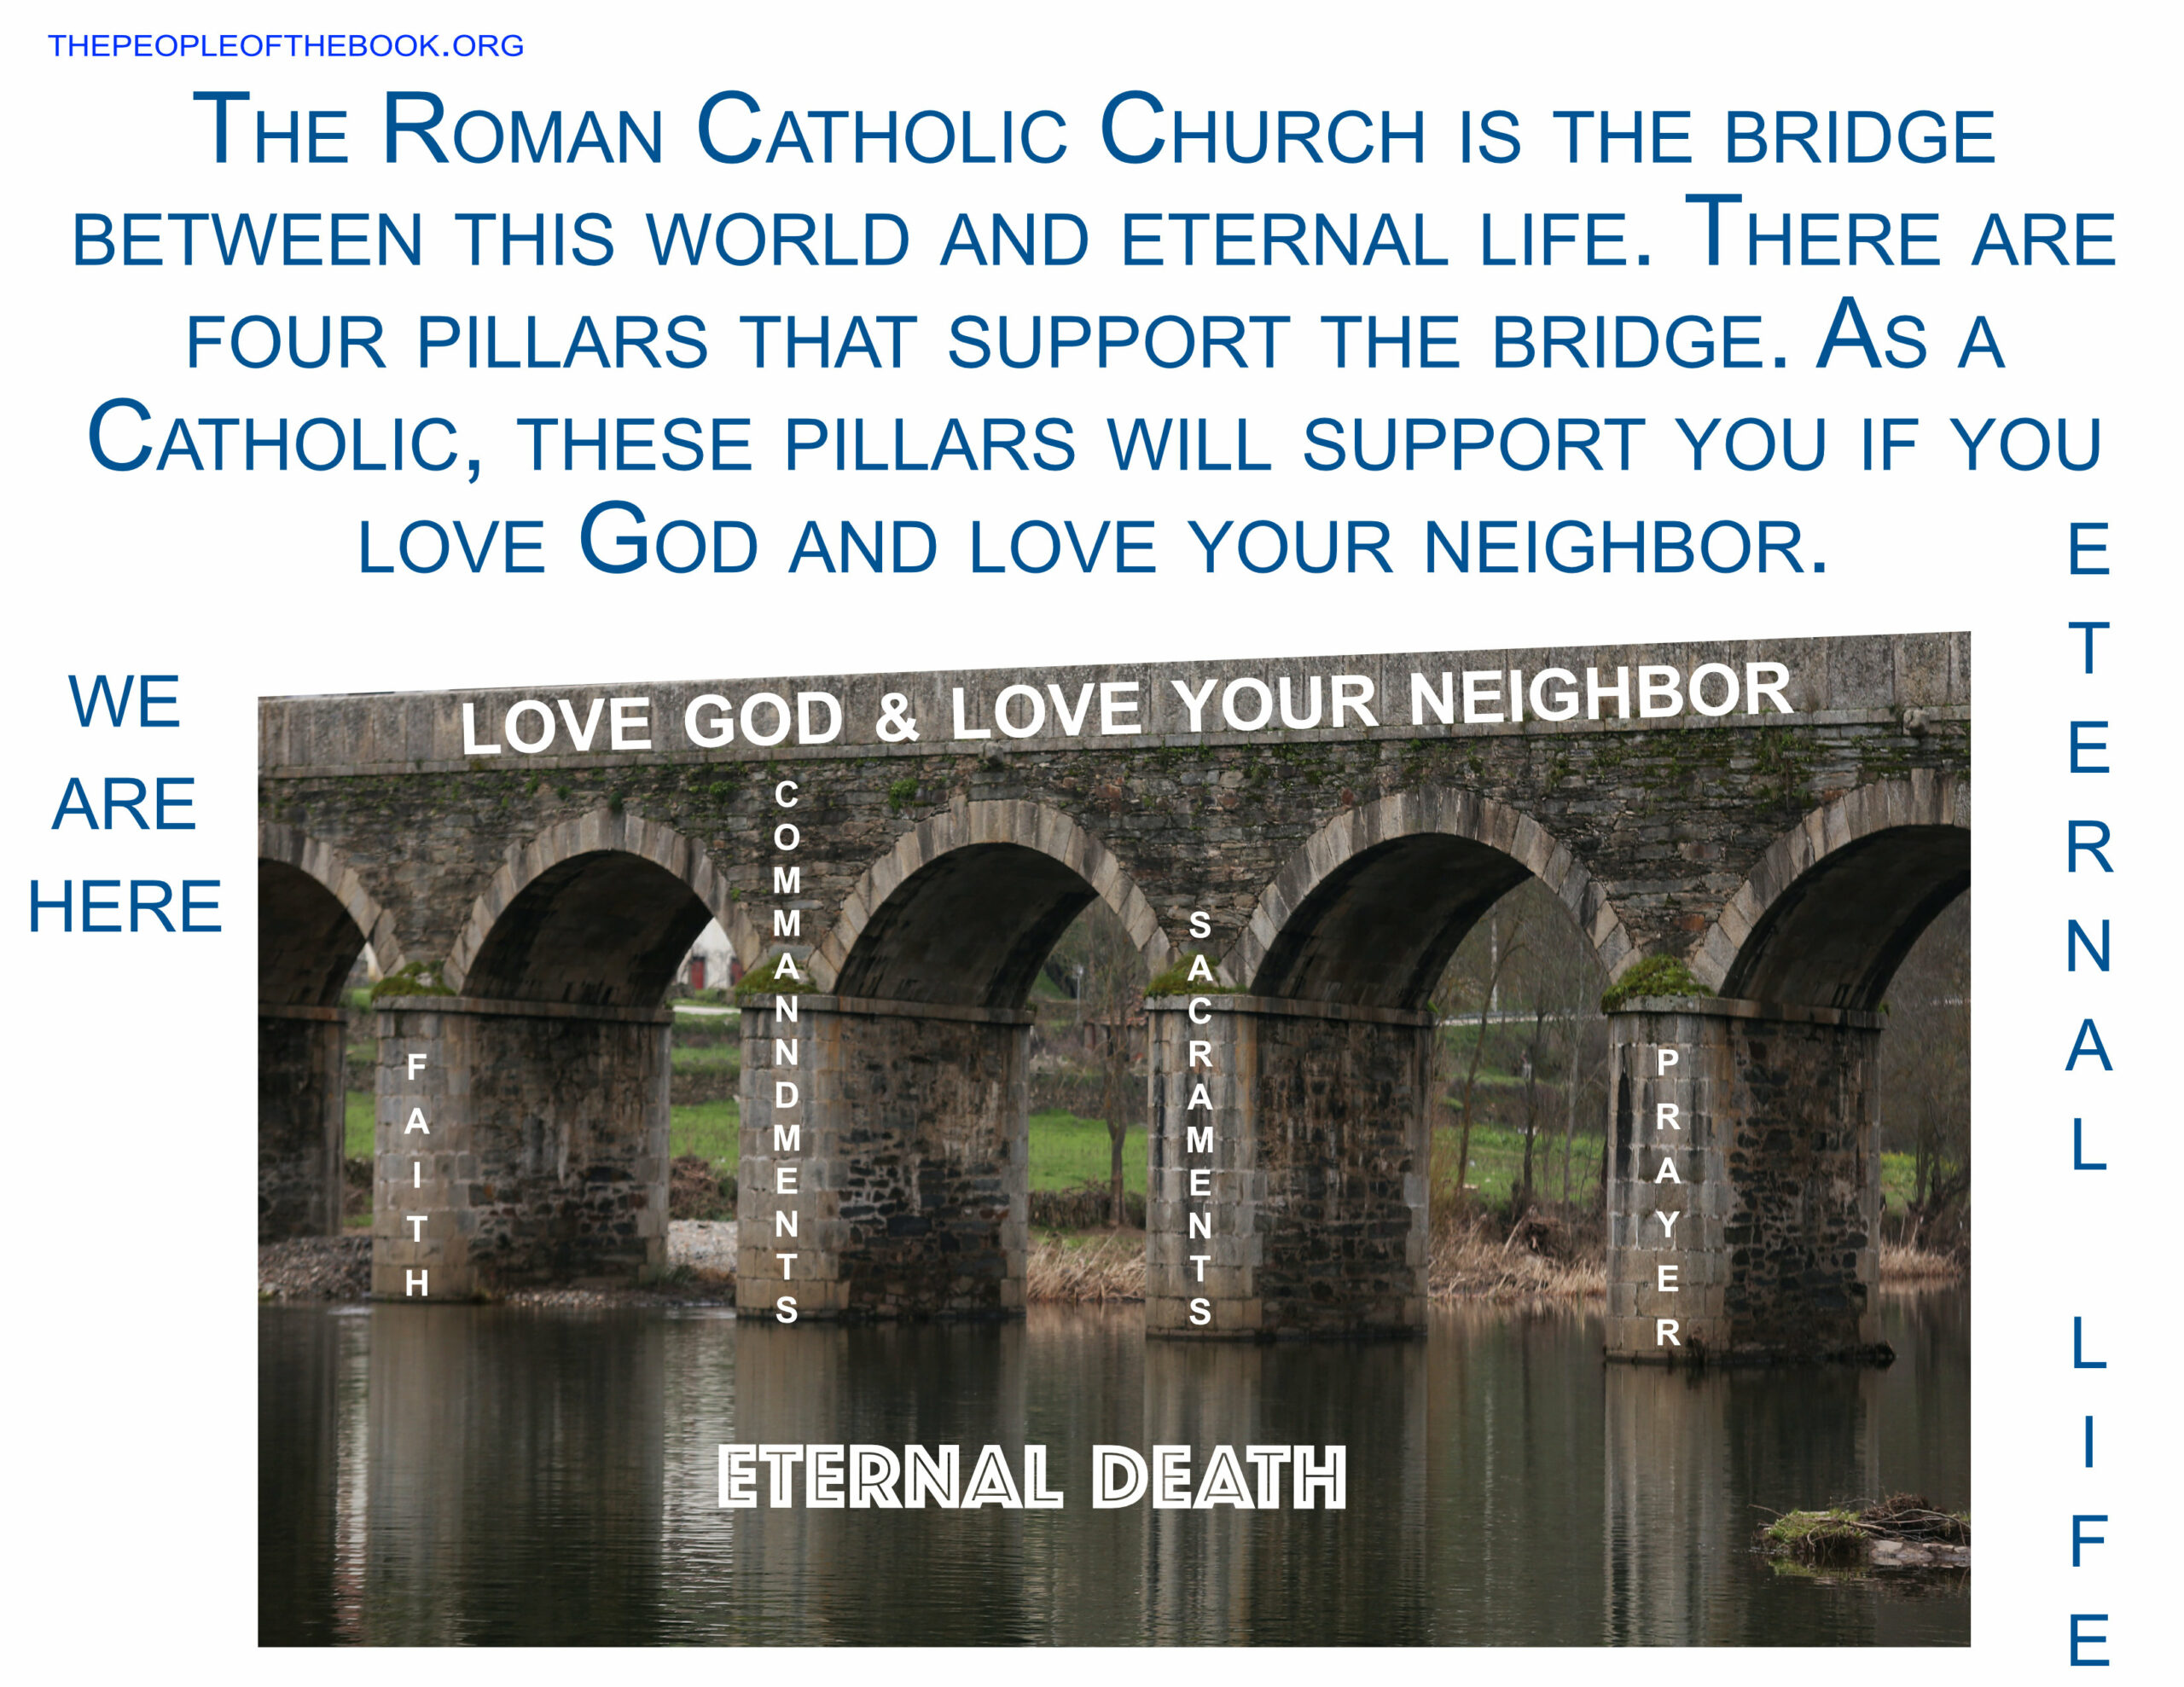 The Roman Catholic Church is the bridge between the world and eternal life.The supports to help us cross are to love God and love your neighbor, to have faith, to keep the commandments, participate in the sacraments and to pray